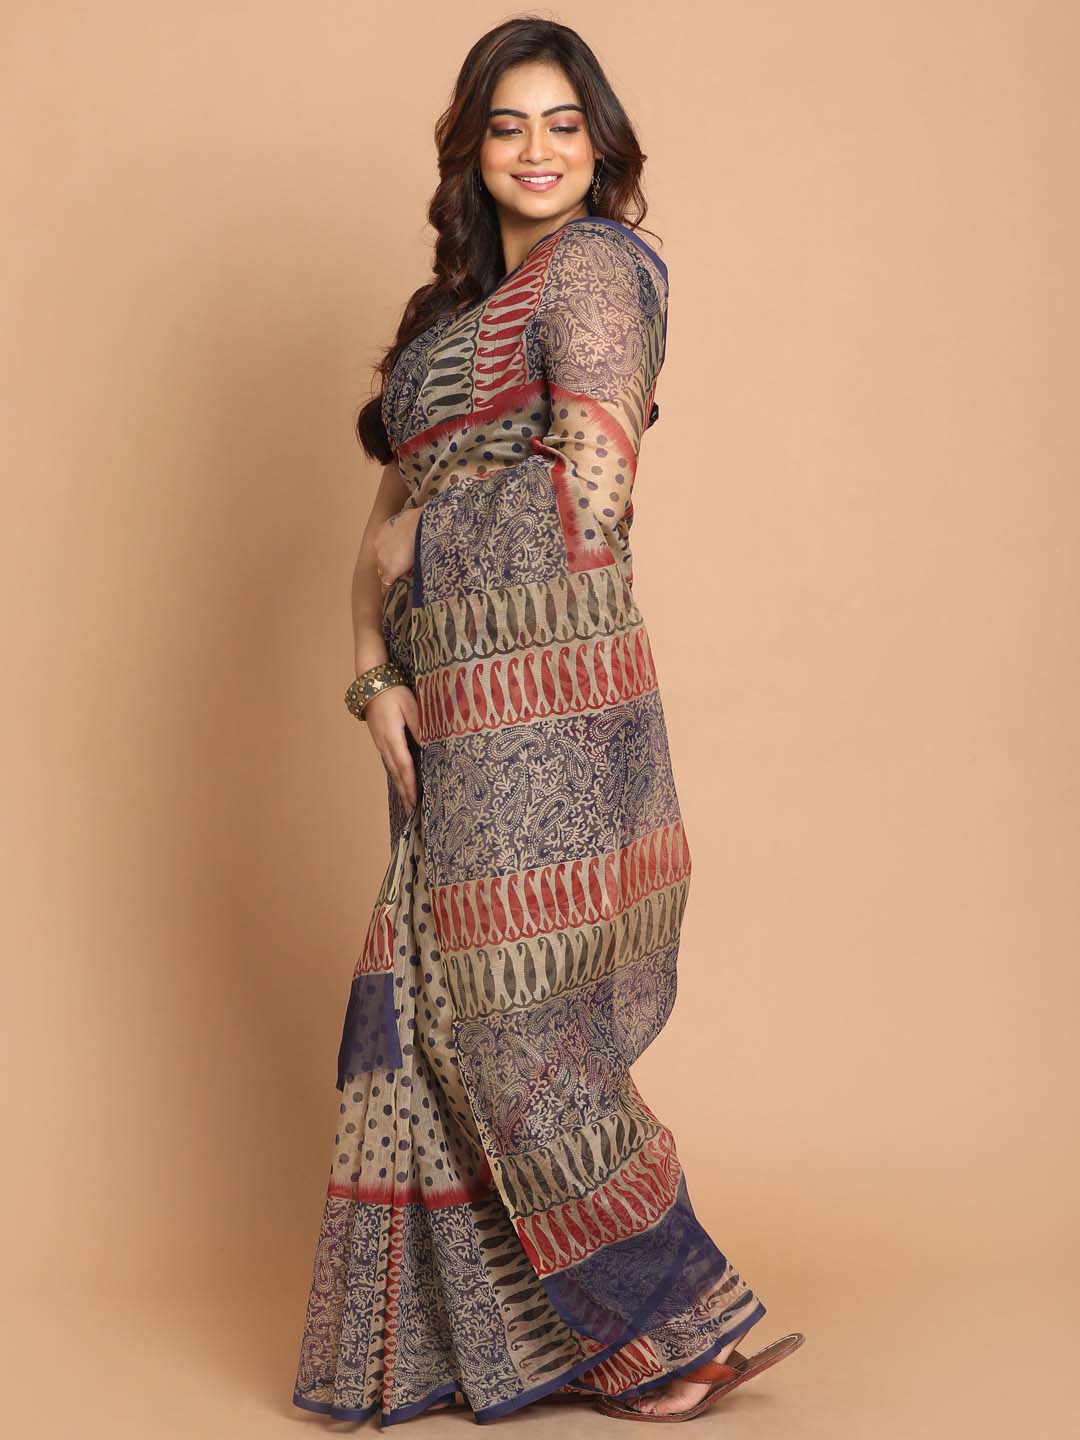 Indethnic Printed Cotton Blend Saree in navy blue - View 2